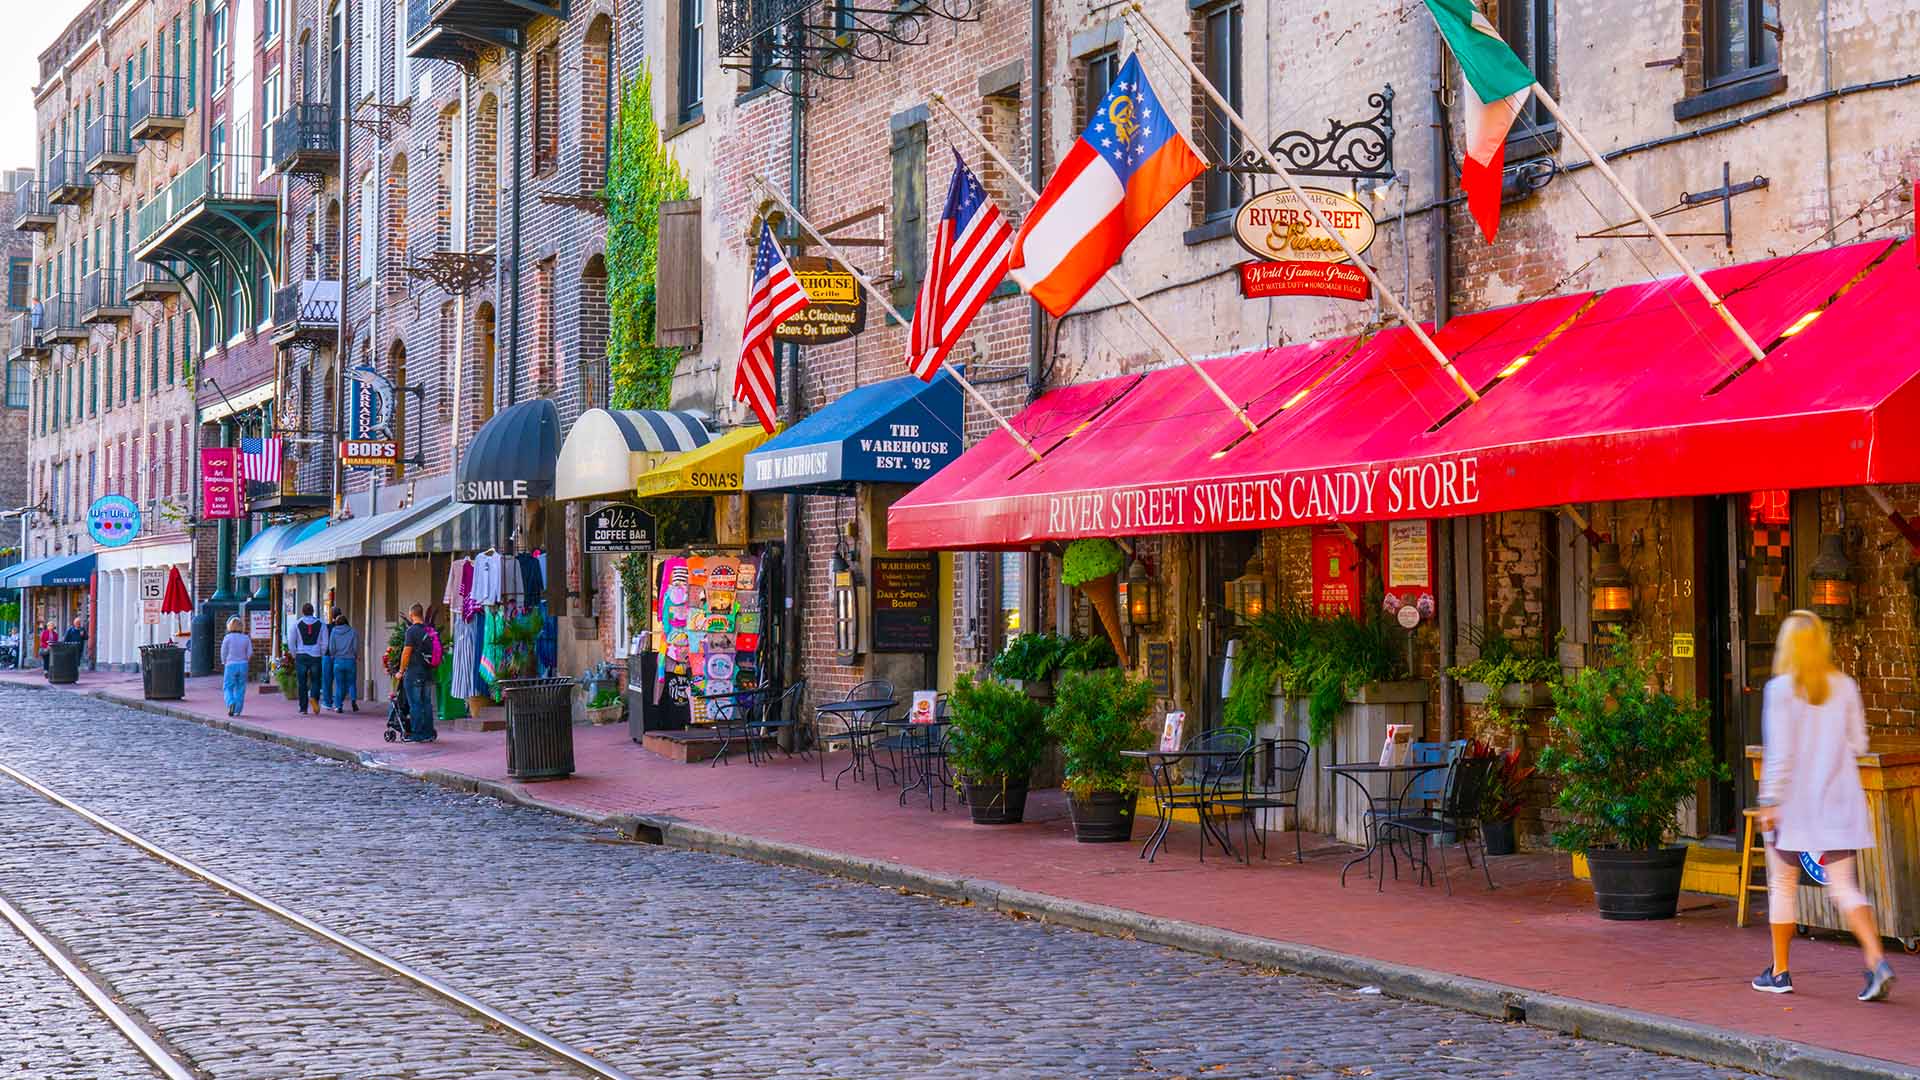 picturesque river street in savannah